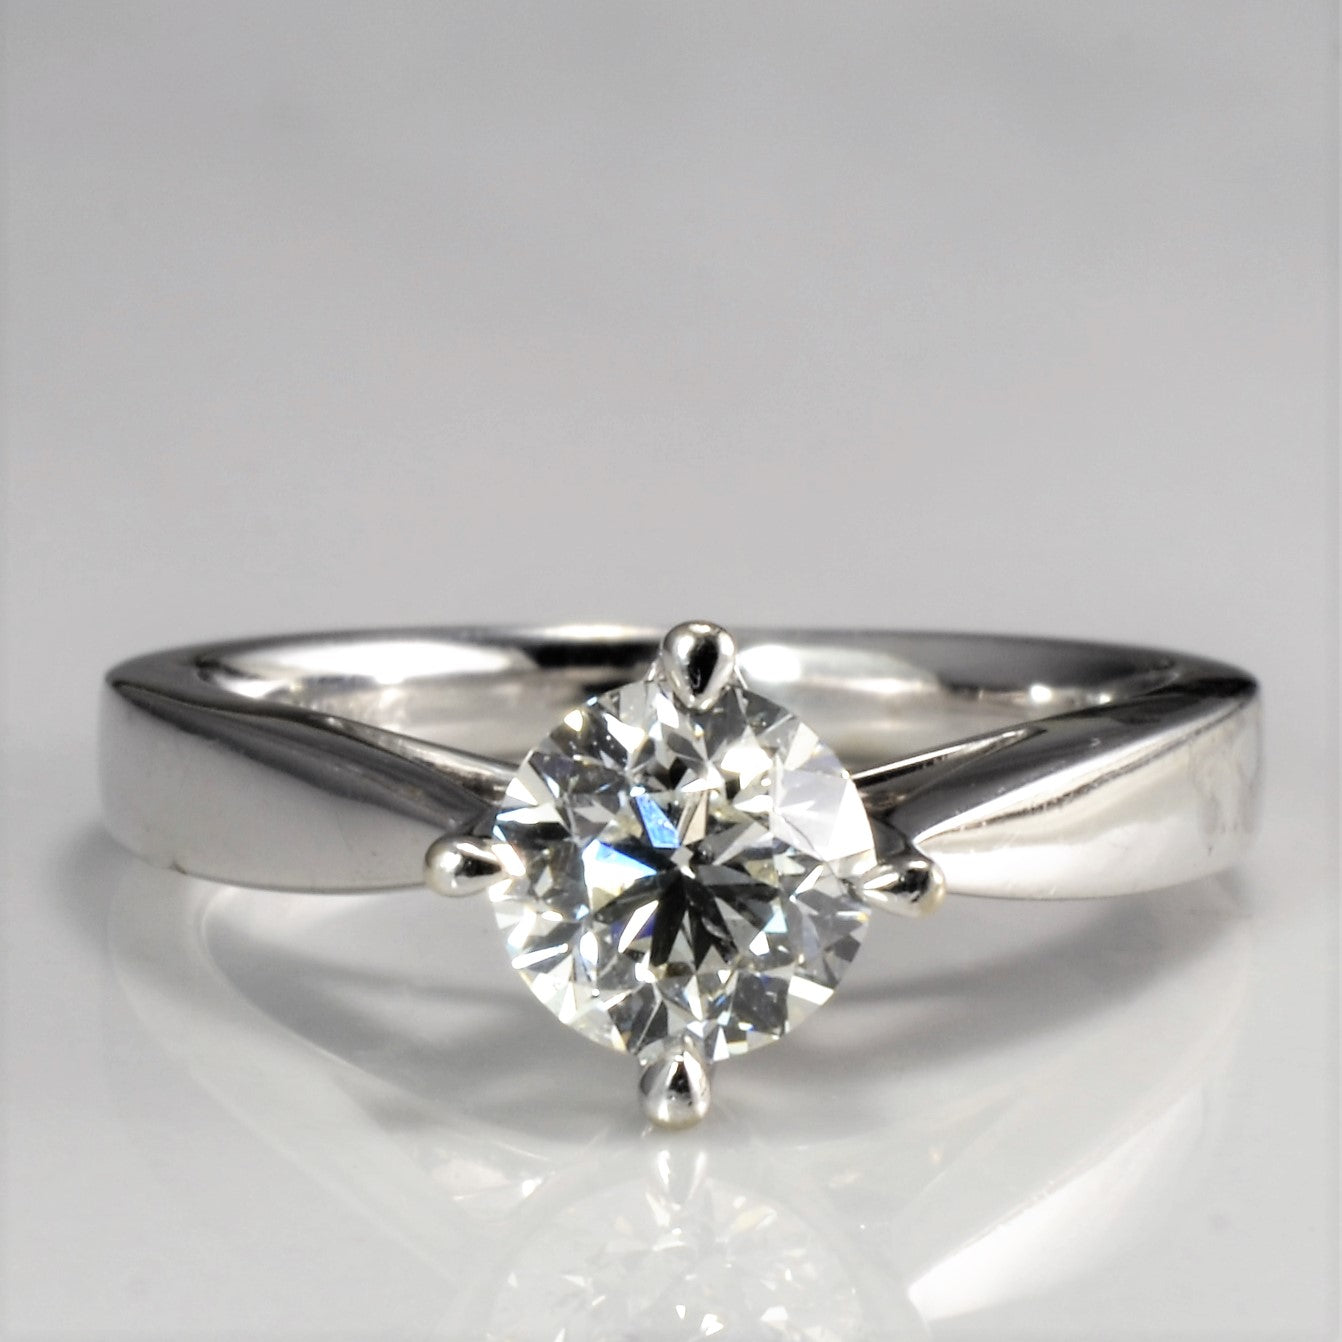 East West Solitaire Canadian Diamond Engagement Ring | 1.00 ct | SI1, H | SZ 5.5 |